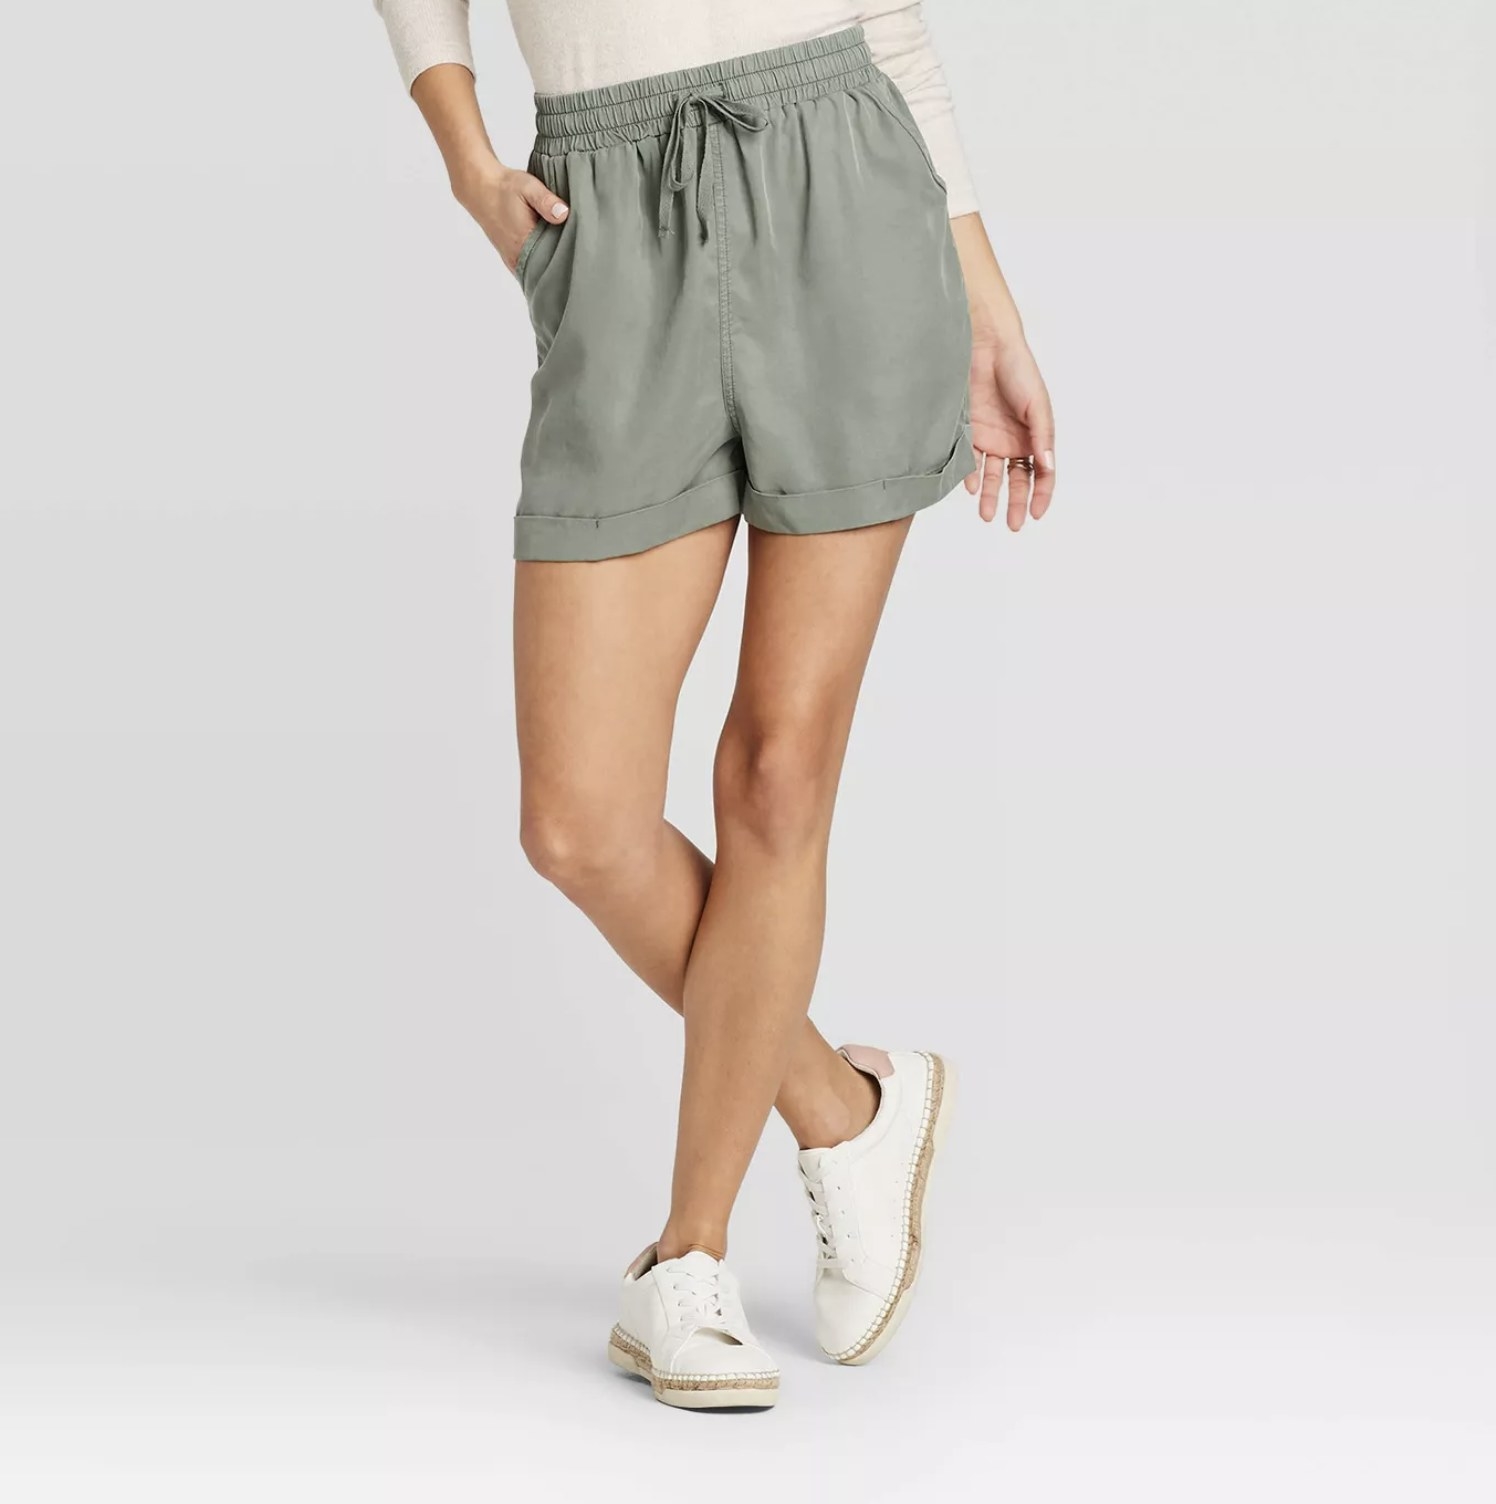 Model wears olive green shorts with white long sleeve tee and white sneakers. 